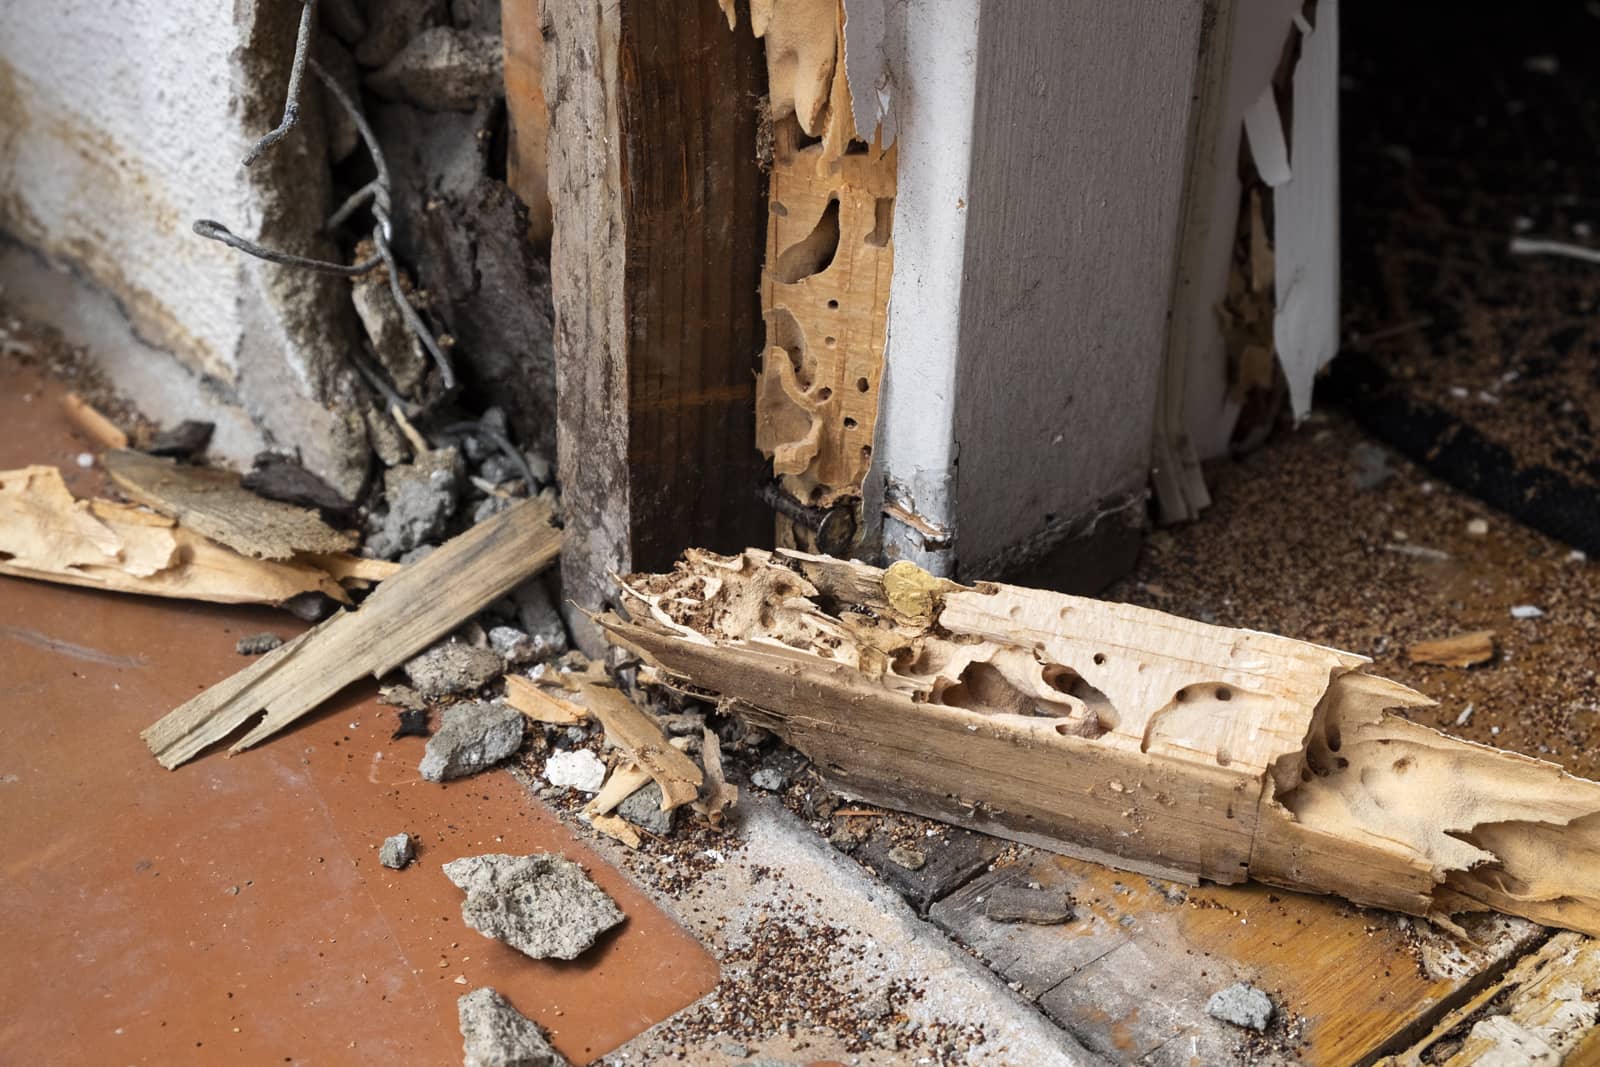 Should You Buy A House With Termite Damage?